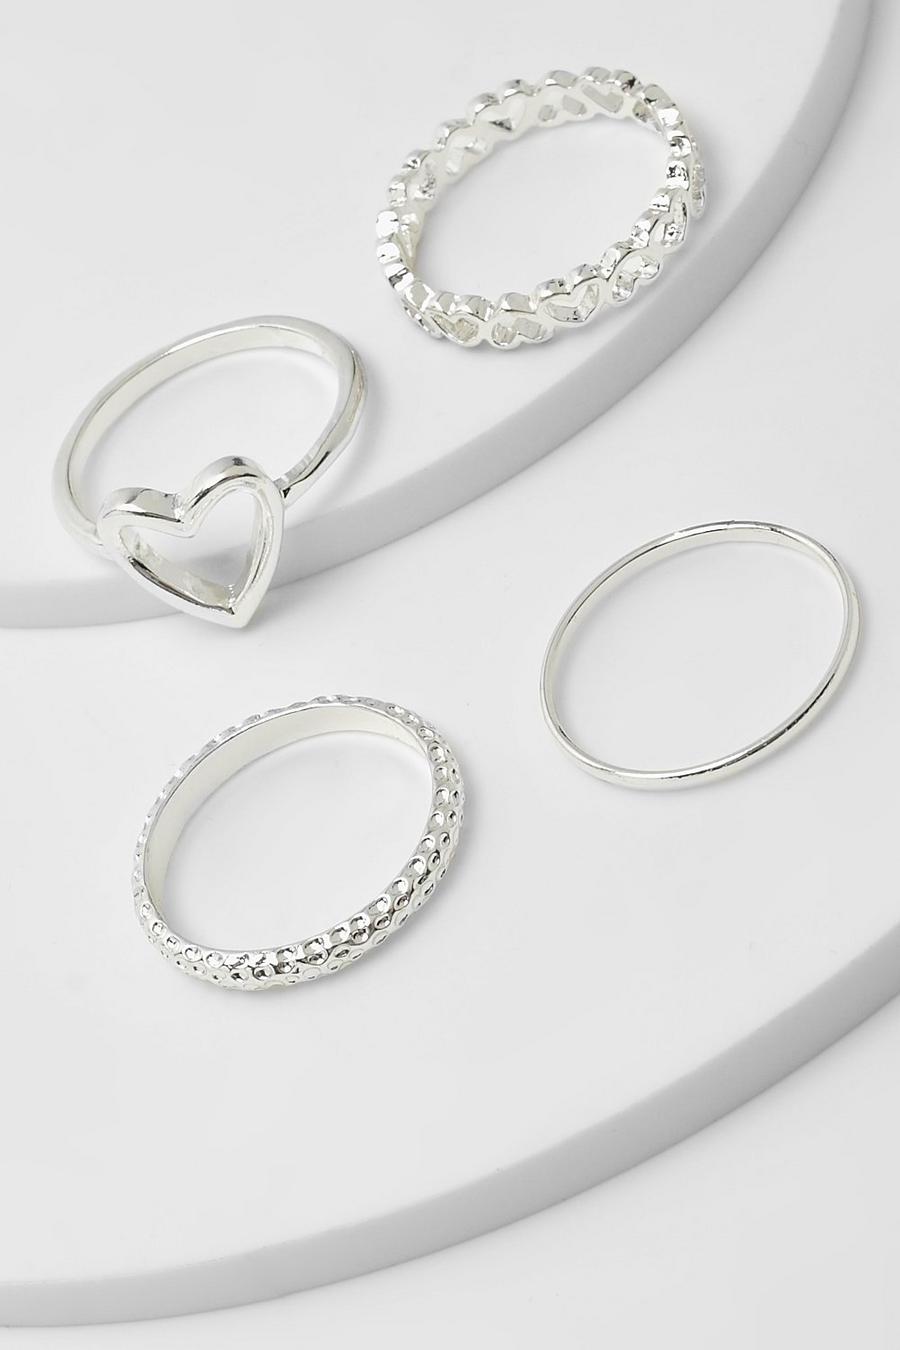 Plus Silver 3 Pack Ring Set